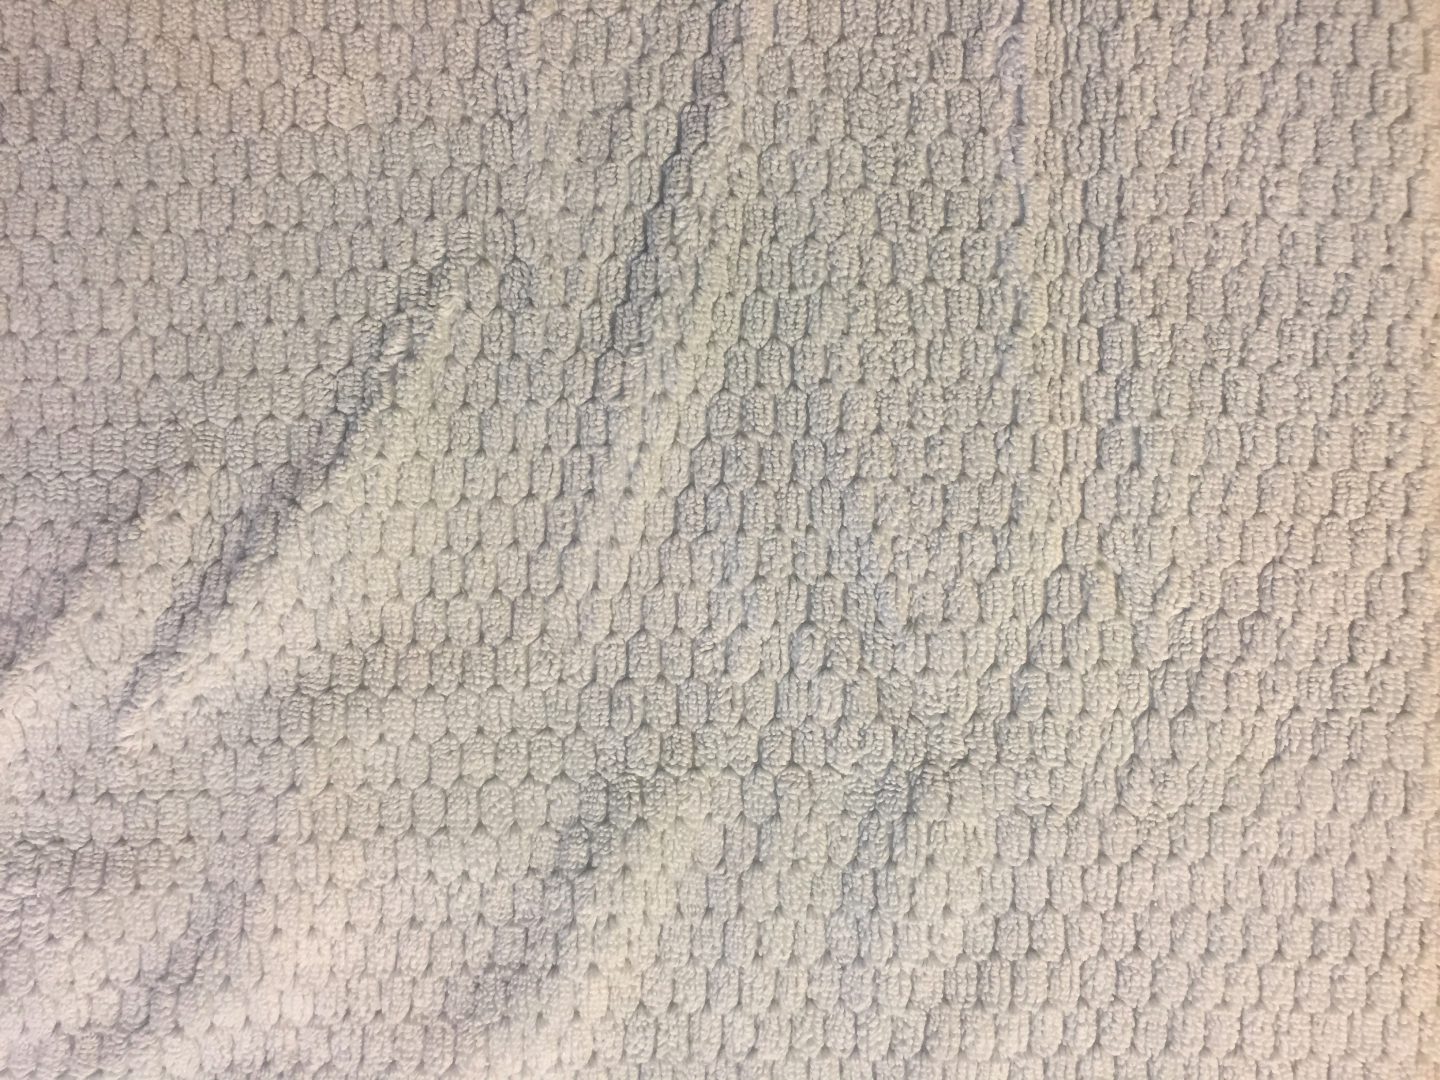 Light Blue Towel Texture with oval pattern | Free Textures